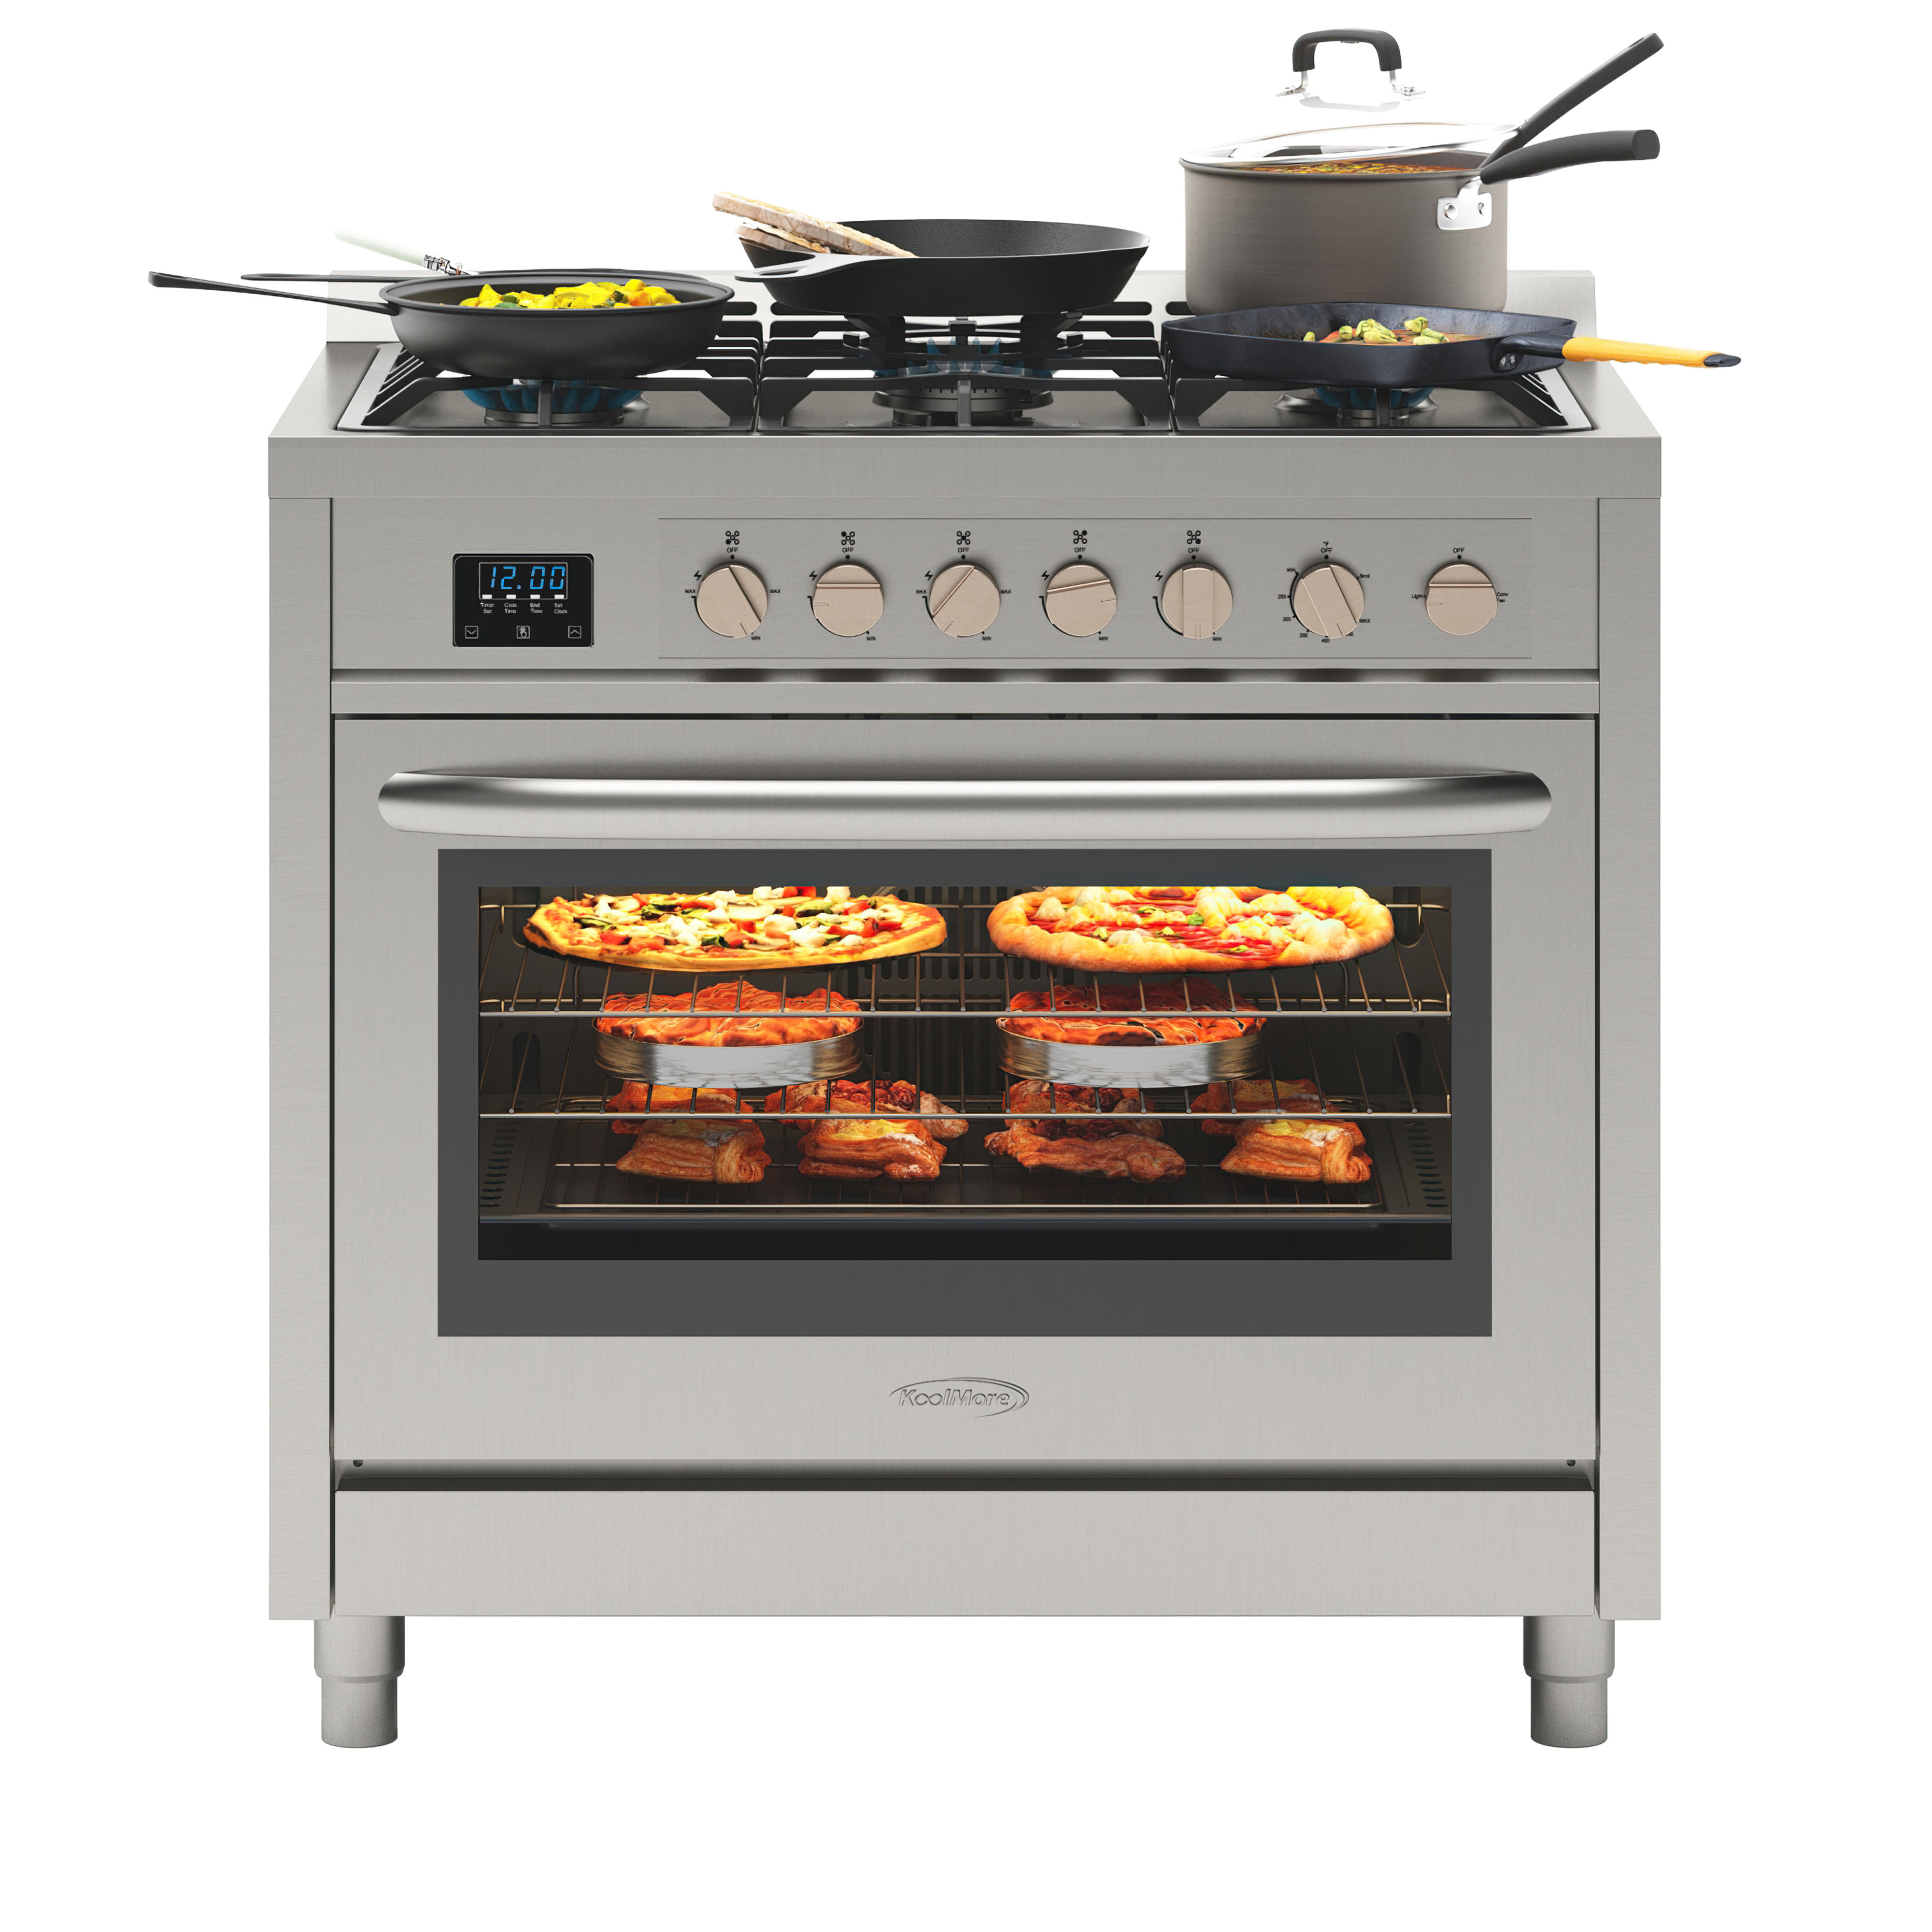 36 in. 2 Burner Commercial Natural GAS Range with 24 in. Griddle in Stainless-Steel (KM-CRG36-NG) Koolmore